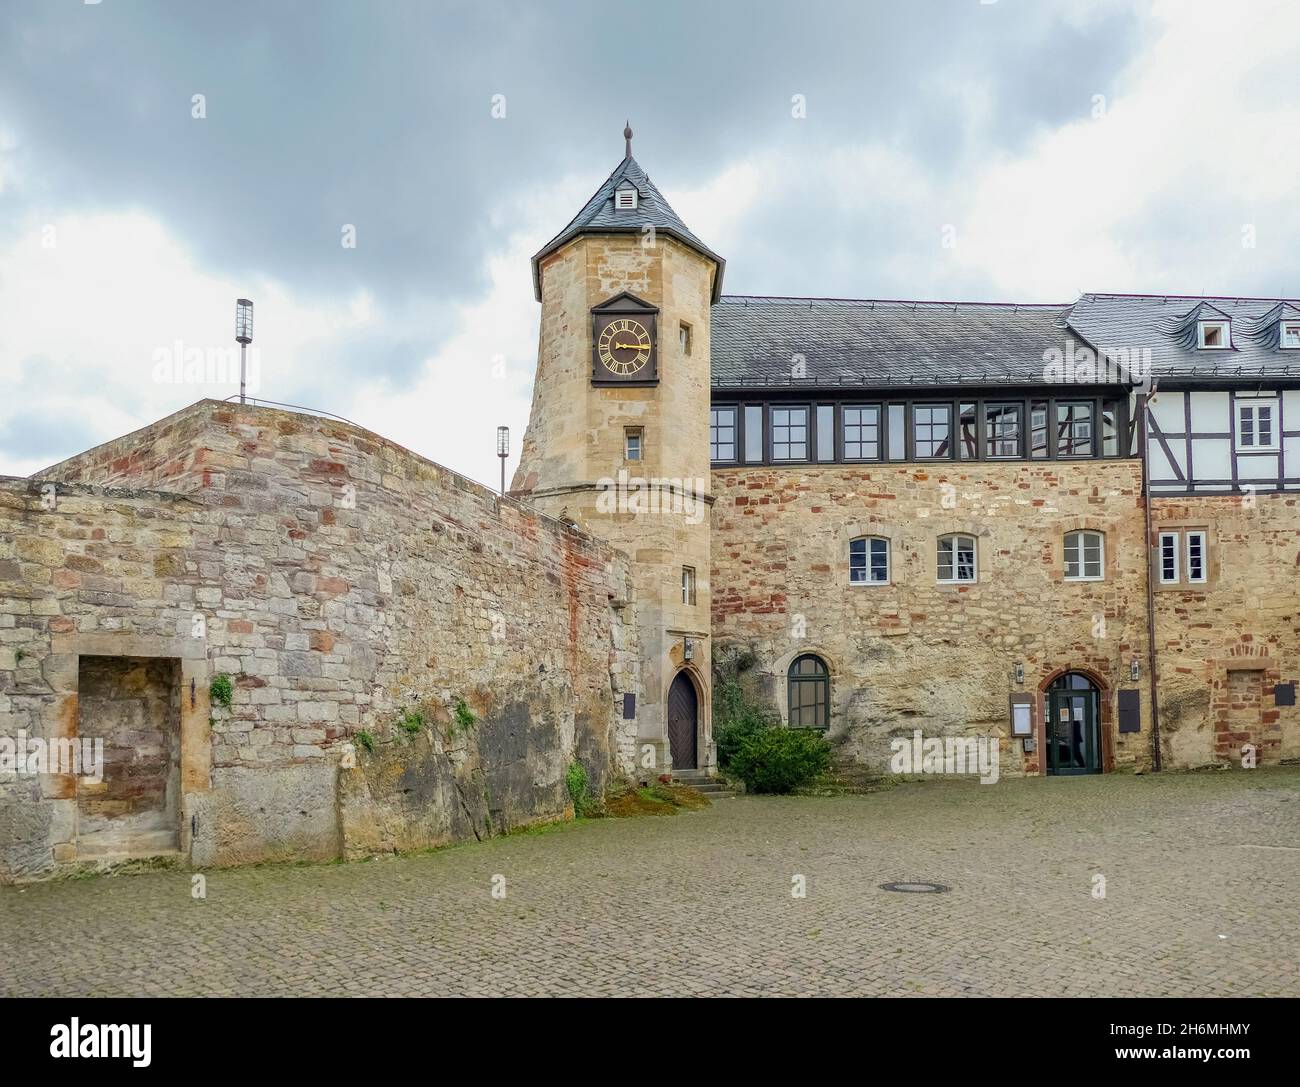 Impression around the Waldeck castle in Hesse, Germany Stock Photo